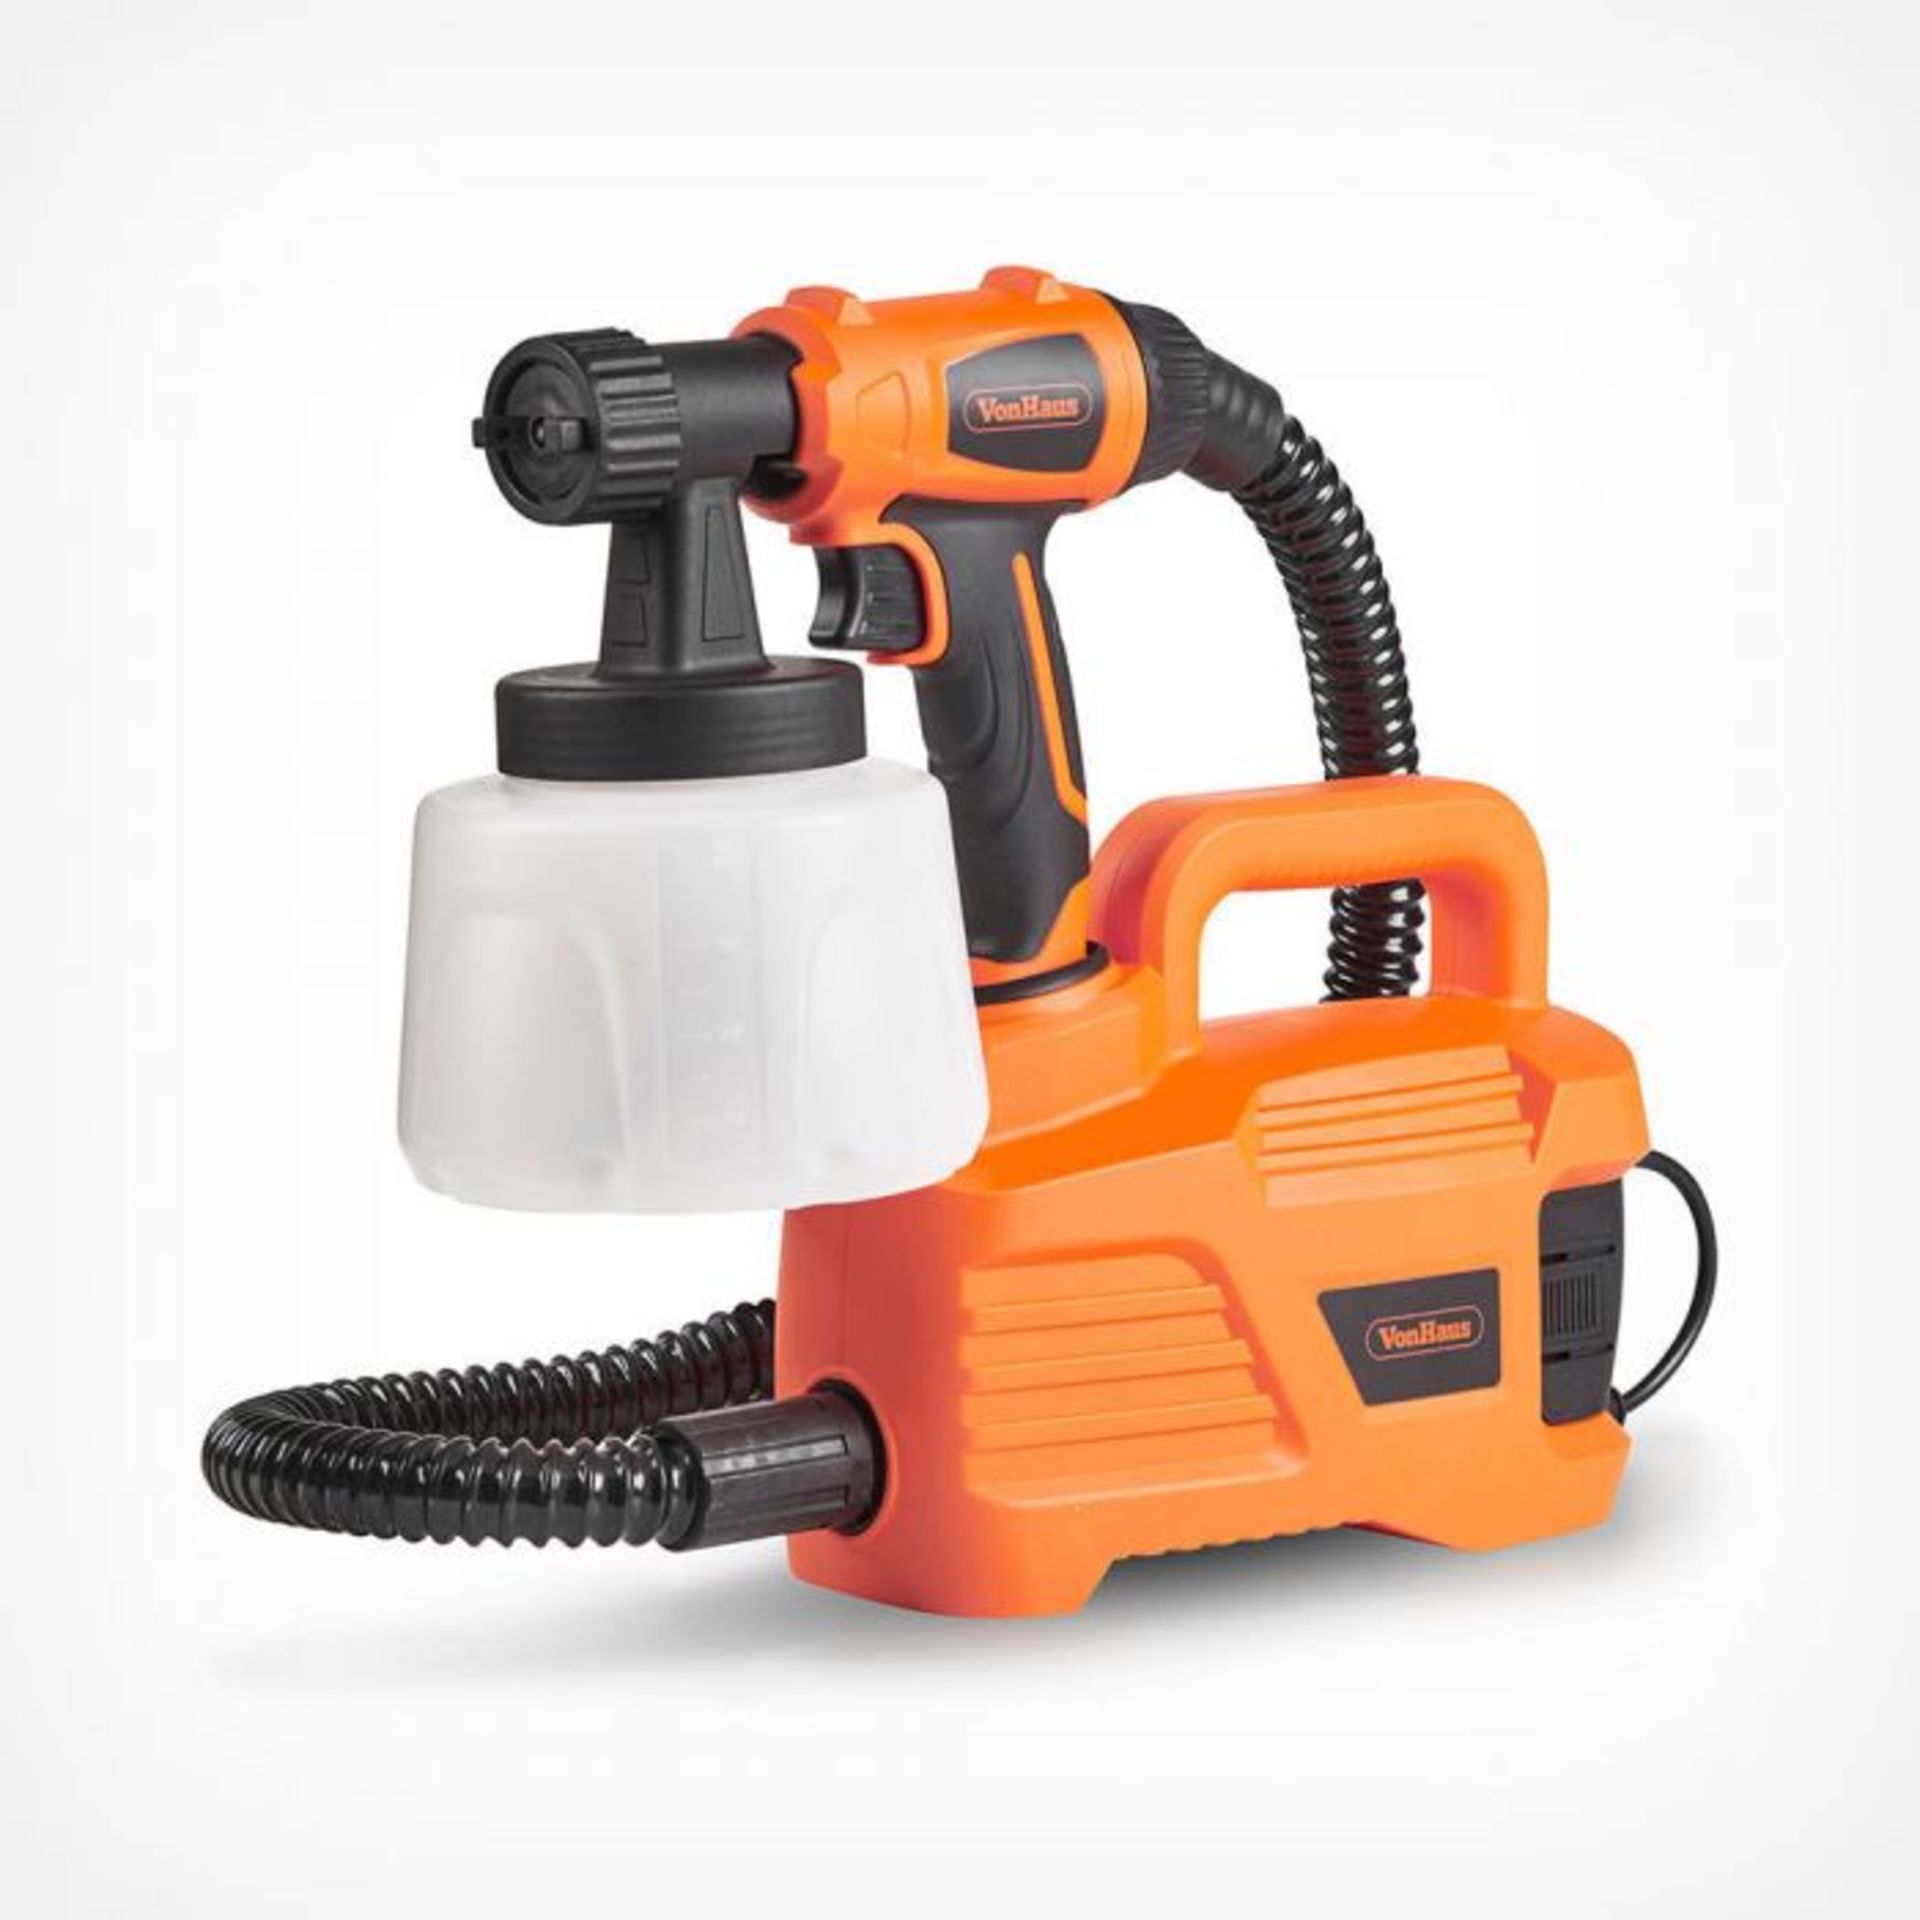 800W Paint Sprayer. Suitable for indoor and outdoor use, as well as for all kinds of materials,